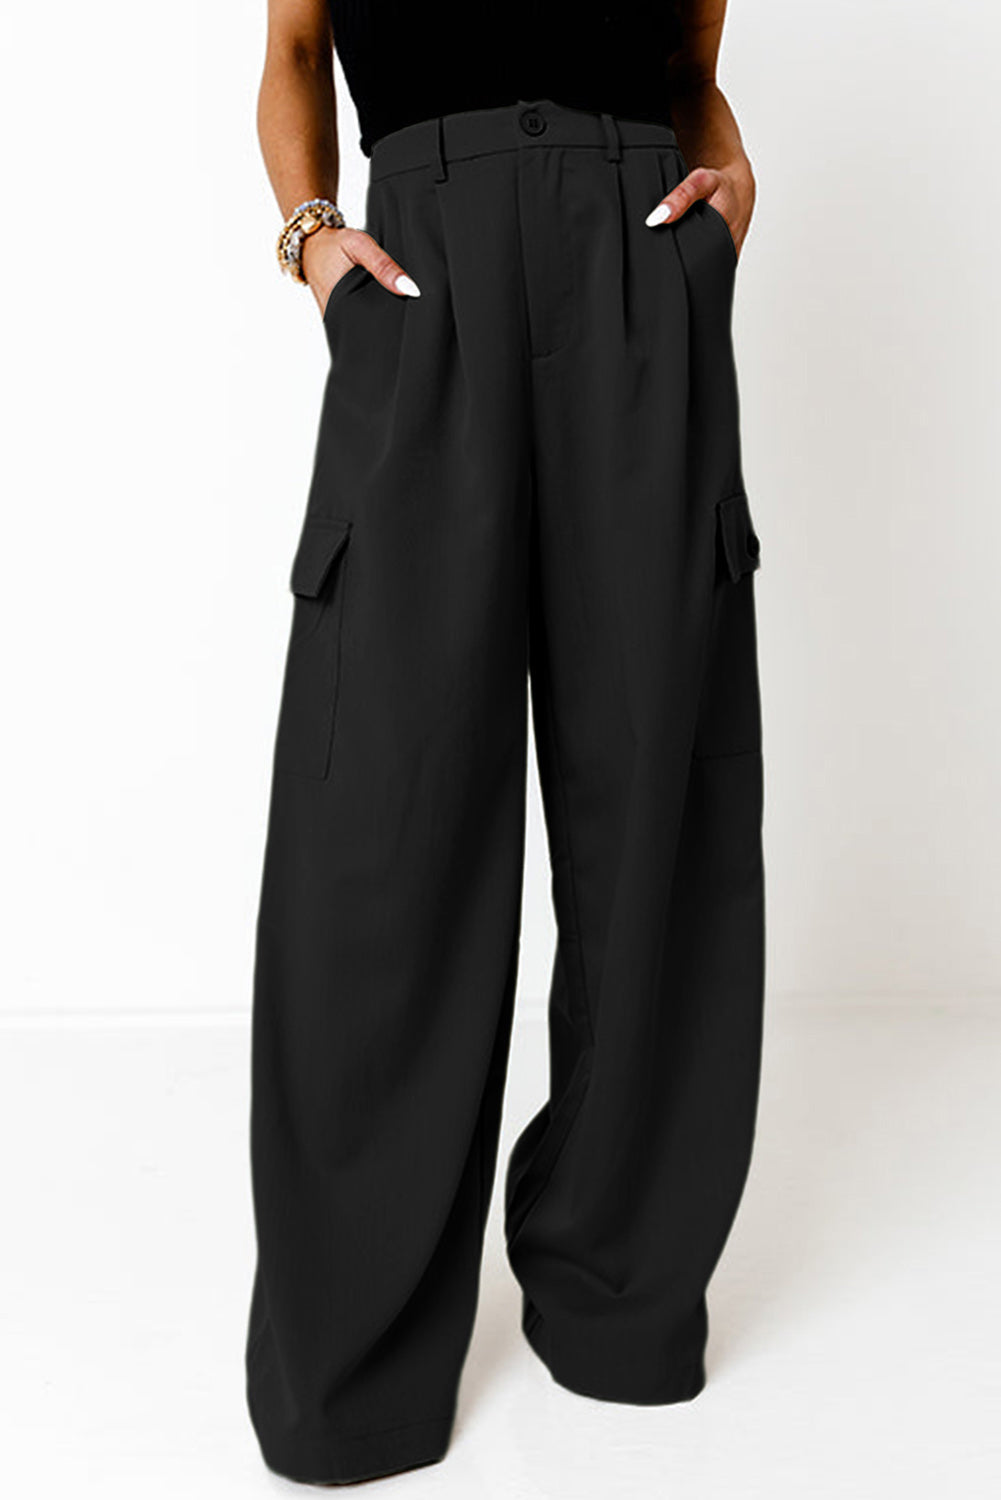 Ruched Wide Leg Pants with Pockets Black